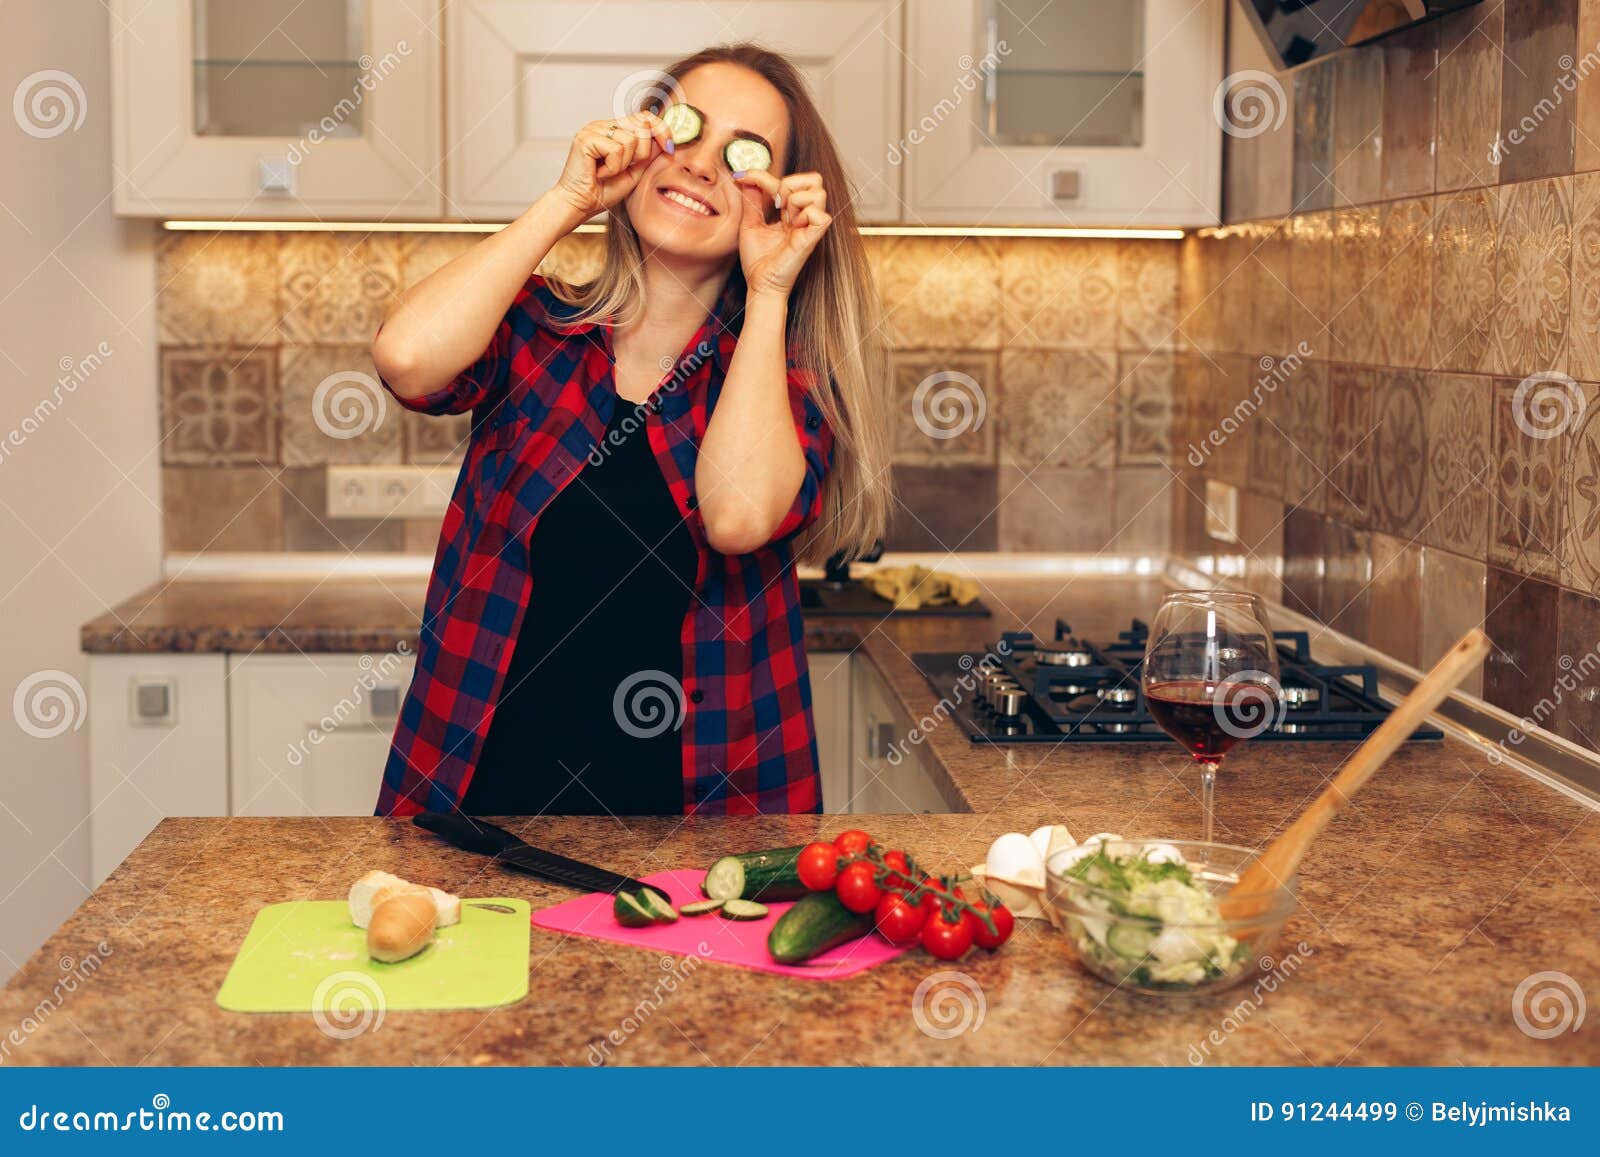 Happy Woman Having Fun With Cucumber At Kitchen Stock Image Image Of Meal Apron 91244499